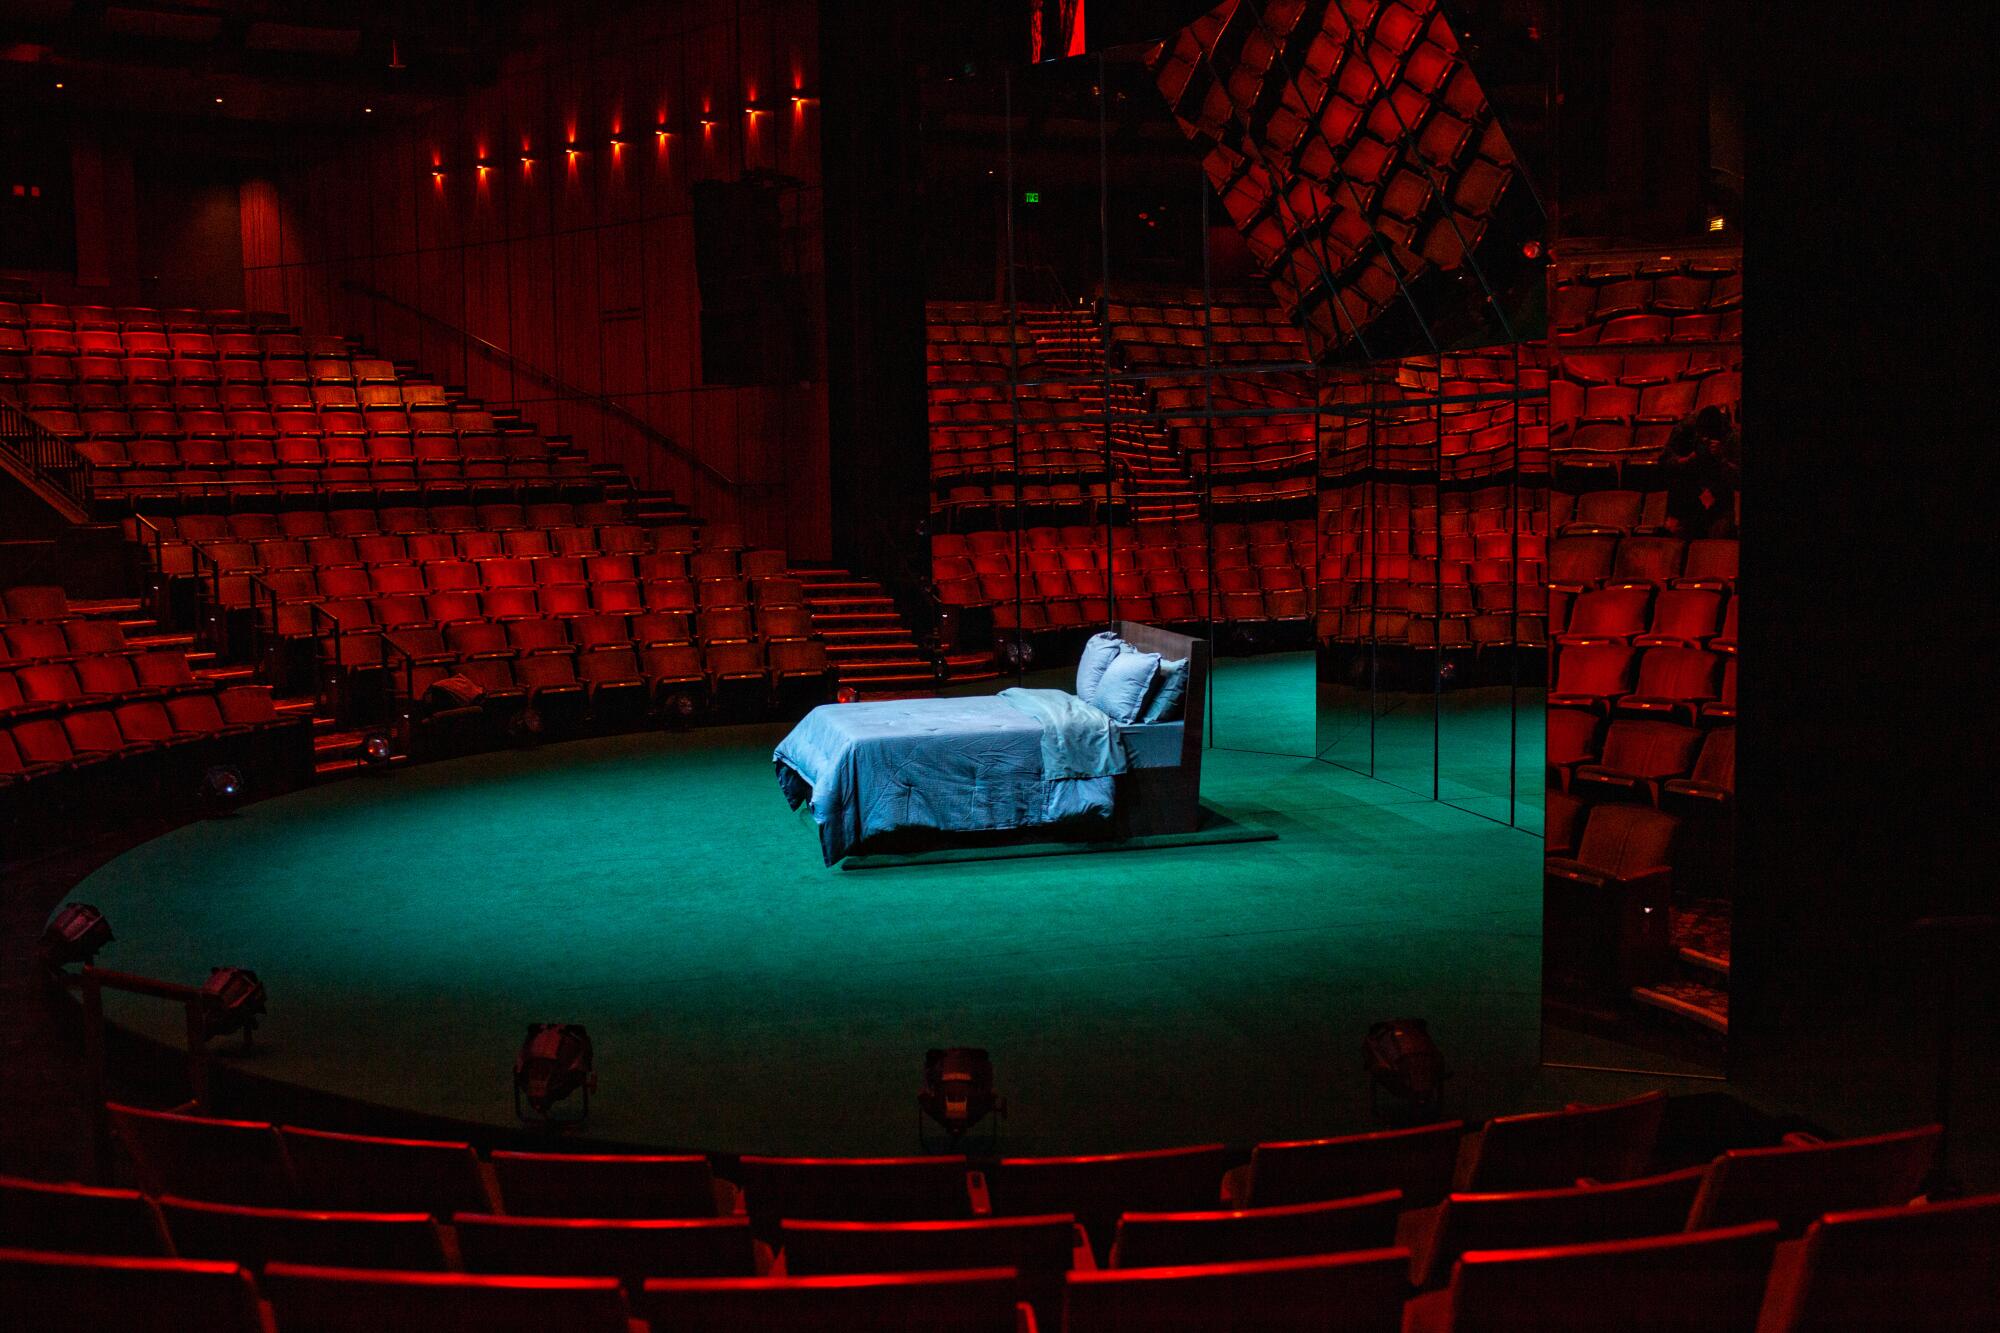 A bed on a stage in an empty theater